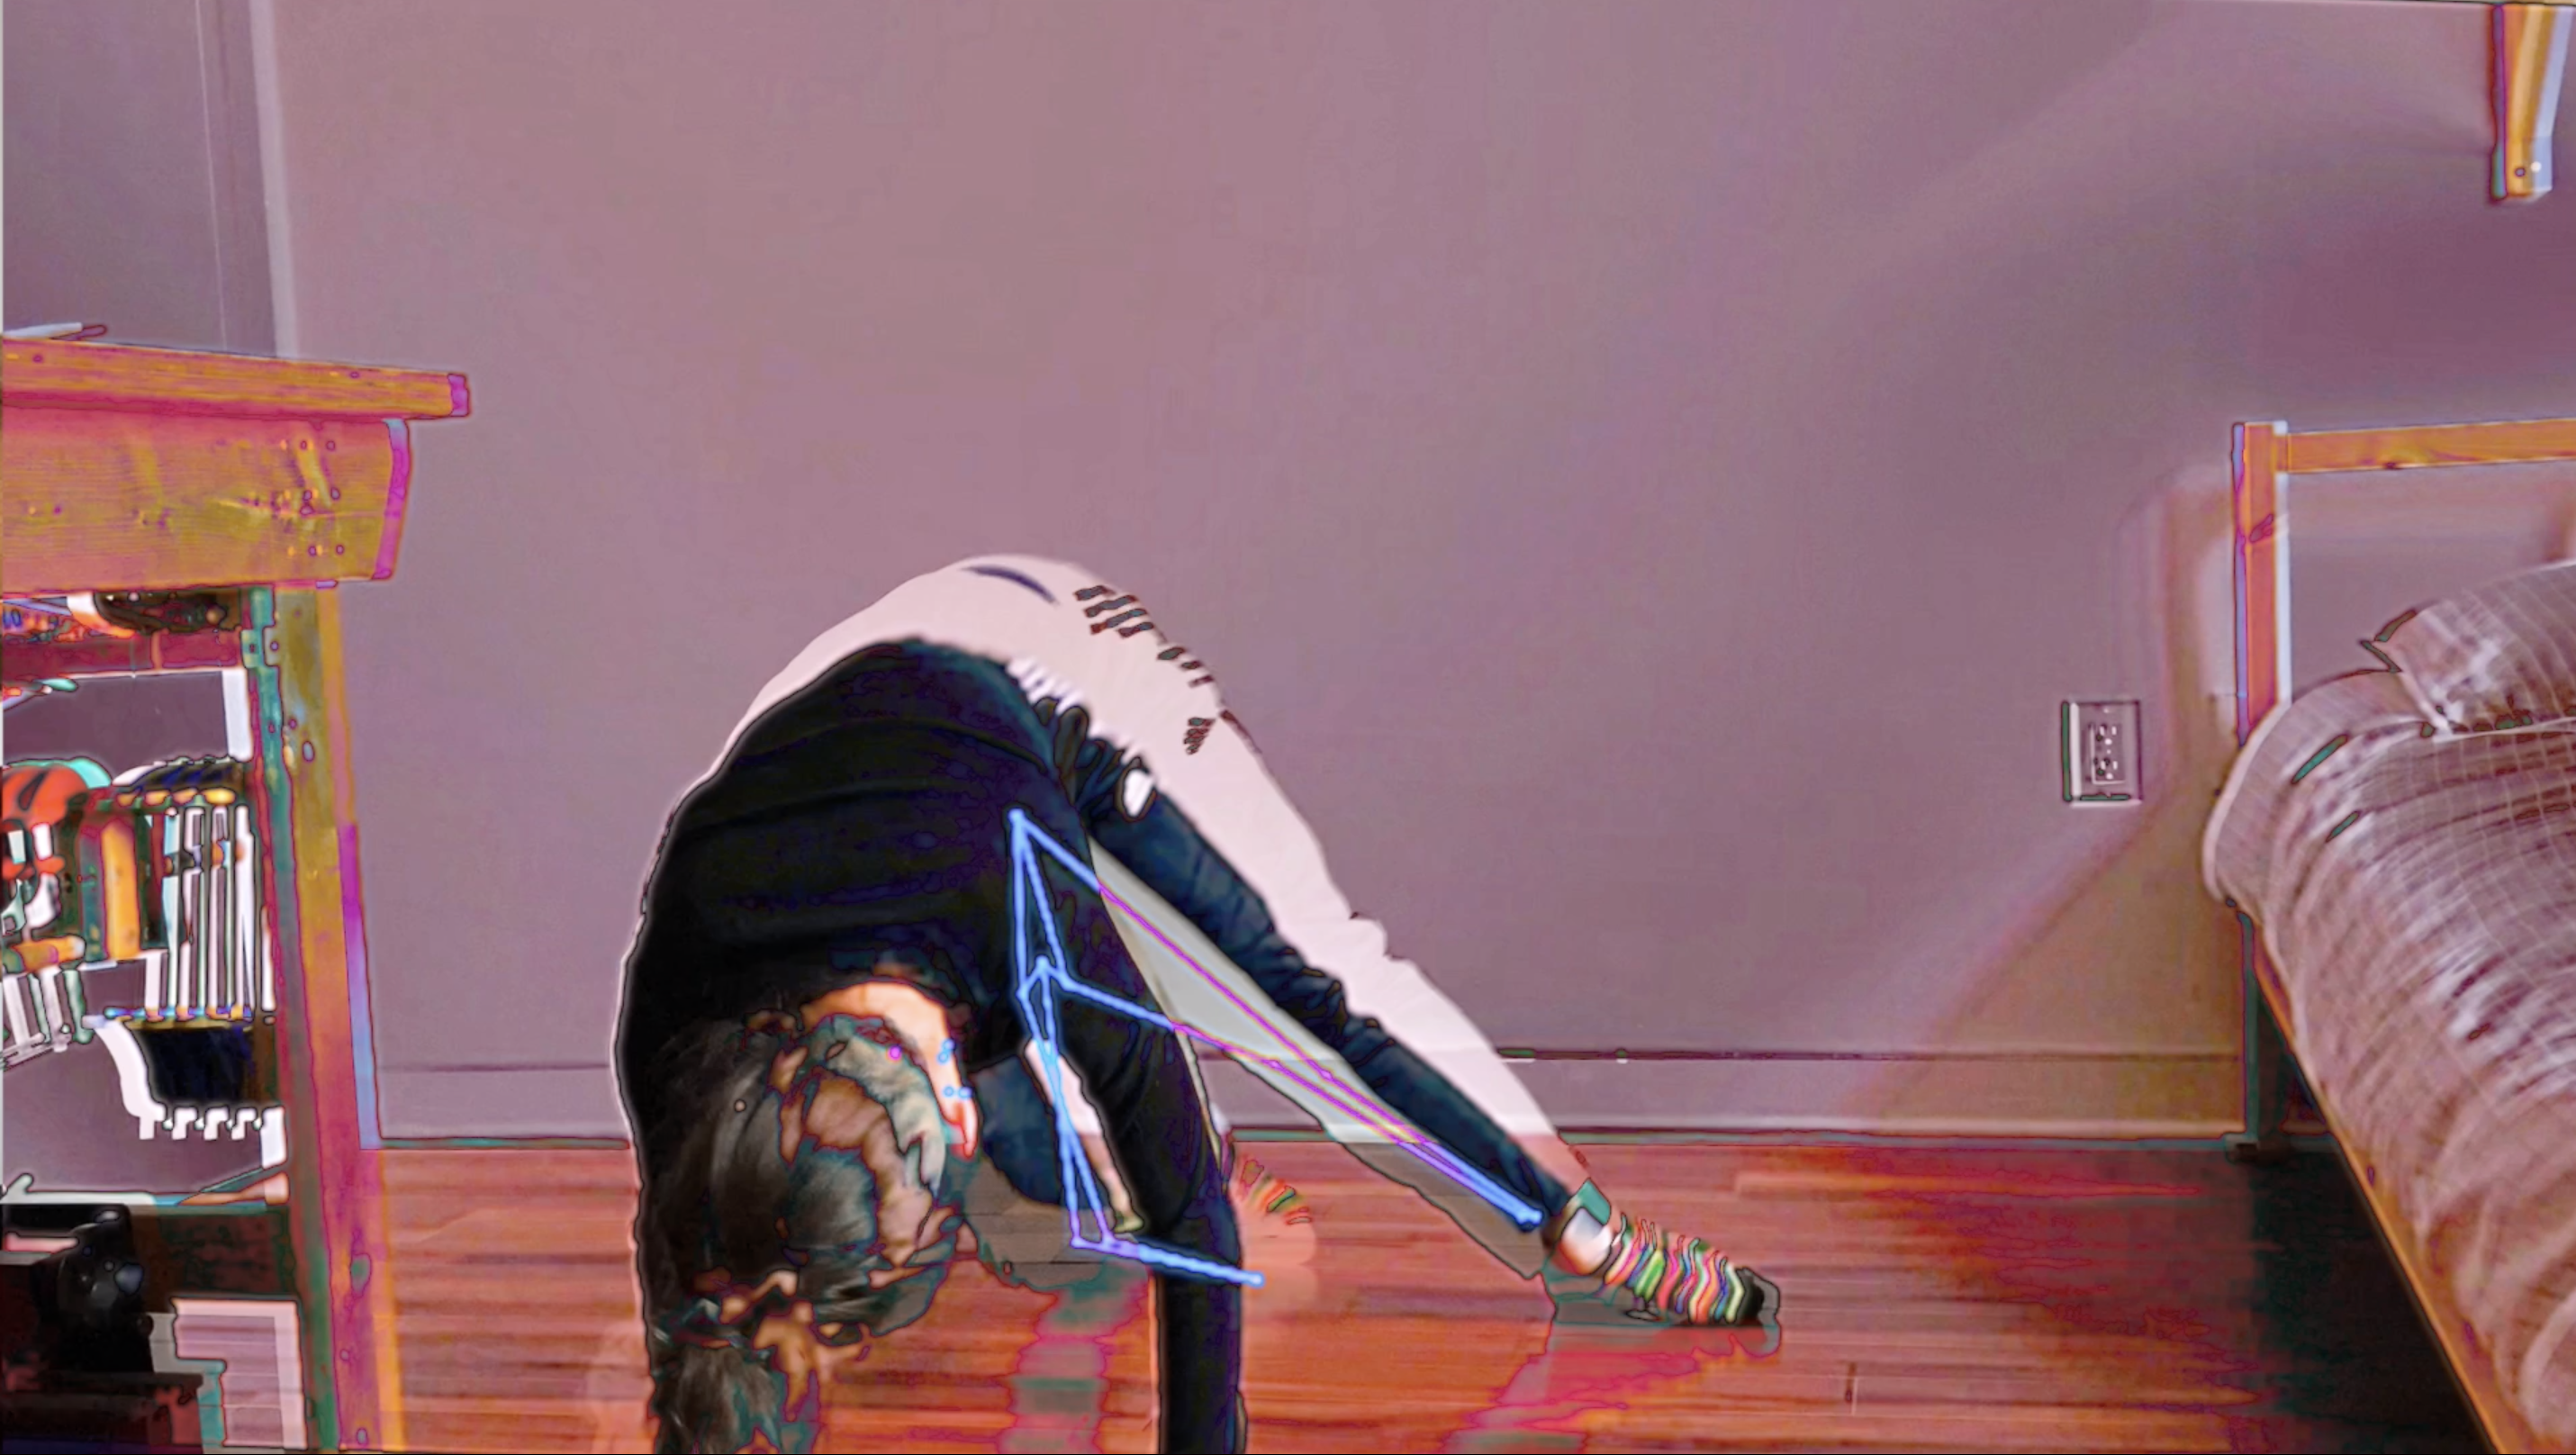 A dancer poses with all hands and feet on the ground, the weight in their front hands and their head bowed down. Their right leg is extended toward the right side of the image, towards a a bed that extends into the frame. A bookcase is partially visible in the left side of the image. Glitchy computer lines cover the dancer's figure, and the entire image is cast in a pinkish hue. Credit is as follows: Time Enough: Clock: November 2020 (Looptime), created by Allison Costa with PoseNet motion capture.